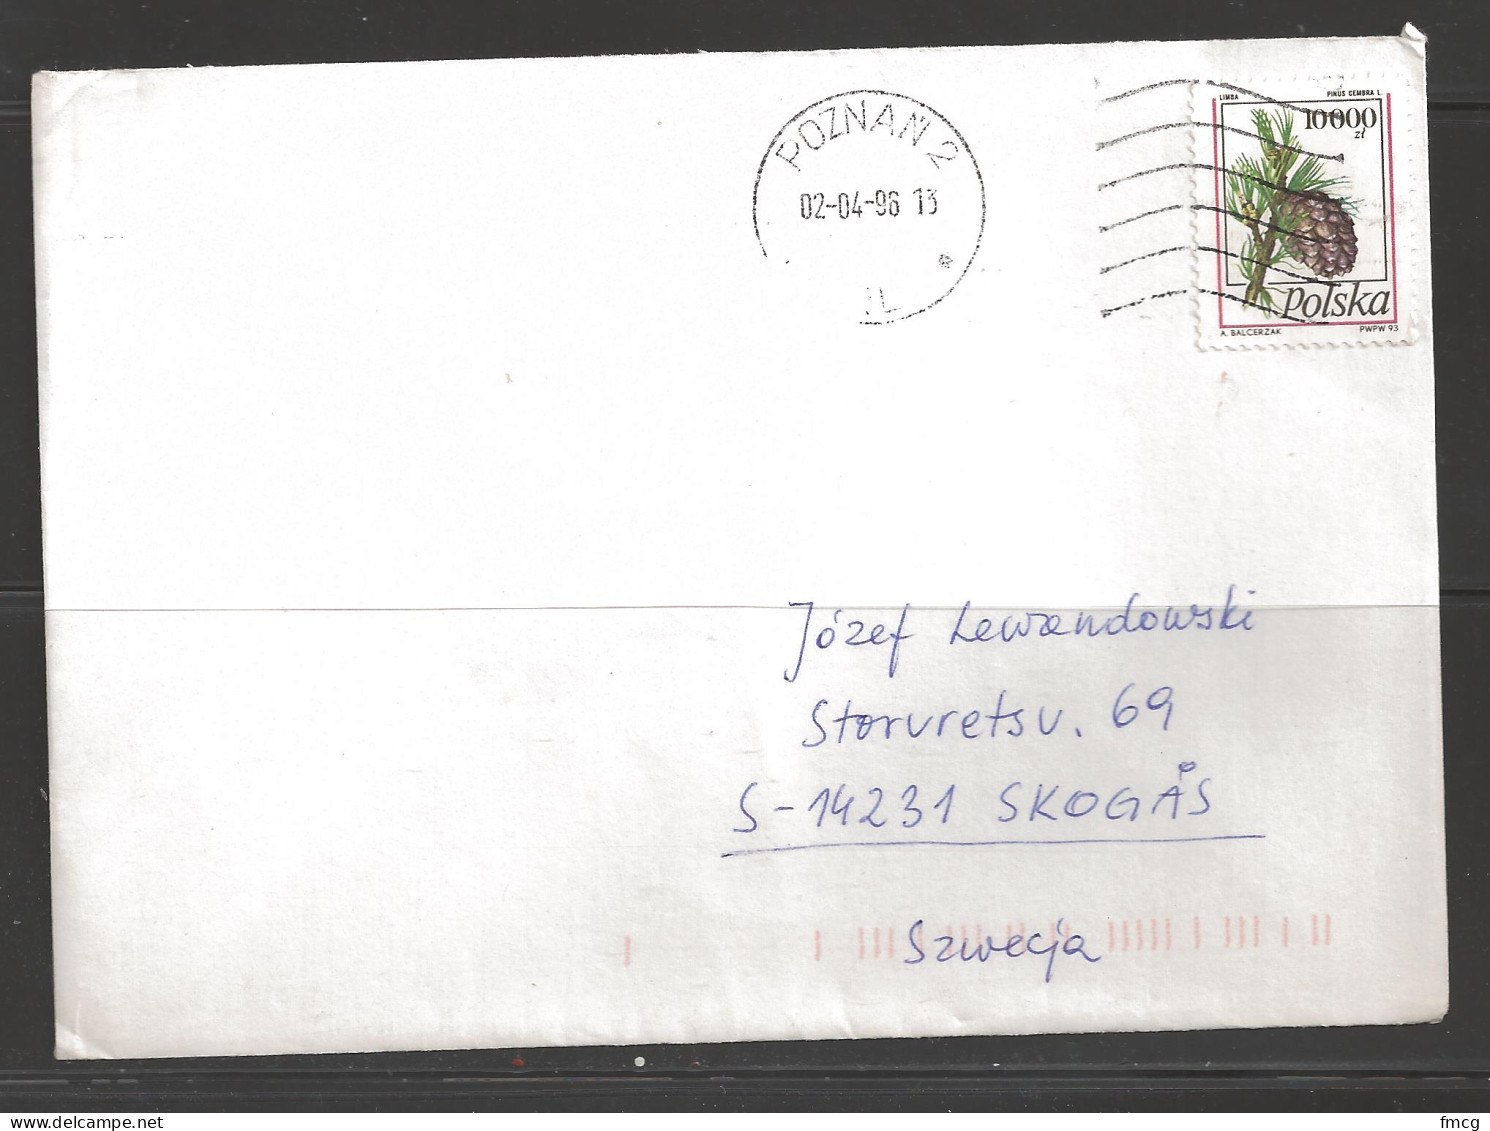 1996 10000zt Pine Cone, Poznan (02-04-96) To Sweden - Covers & Documents